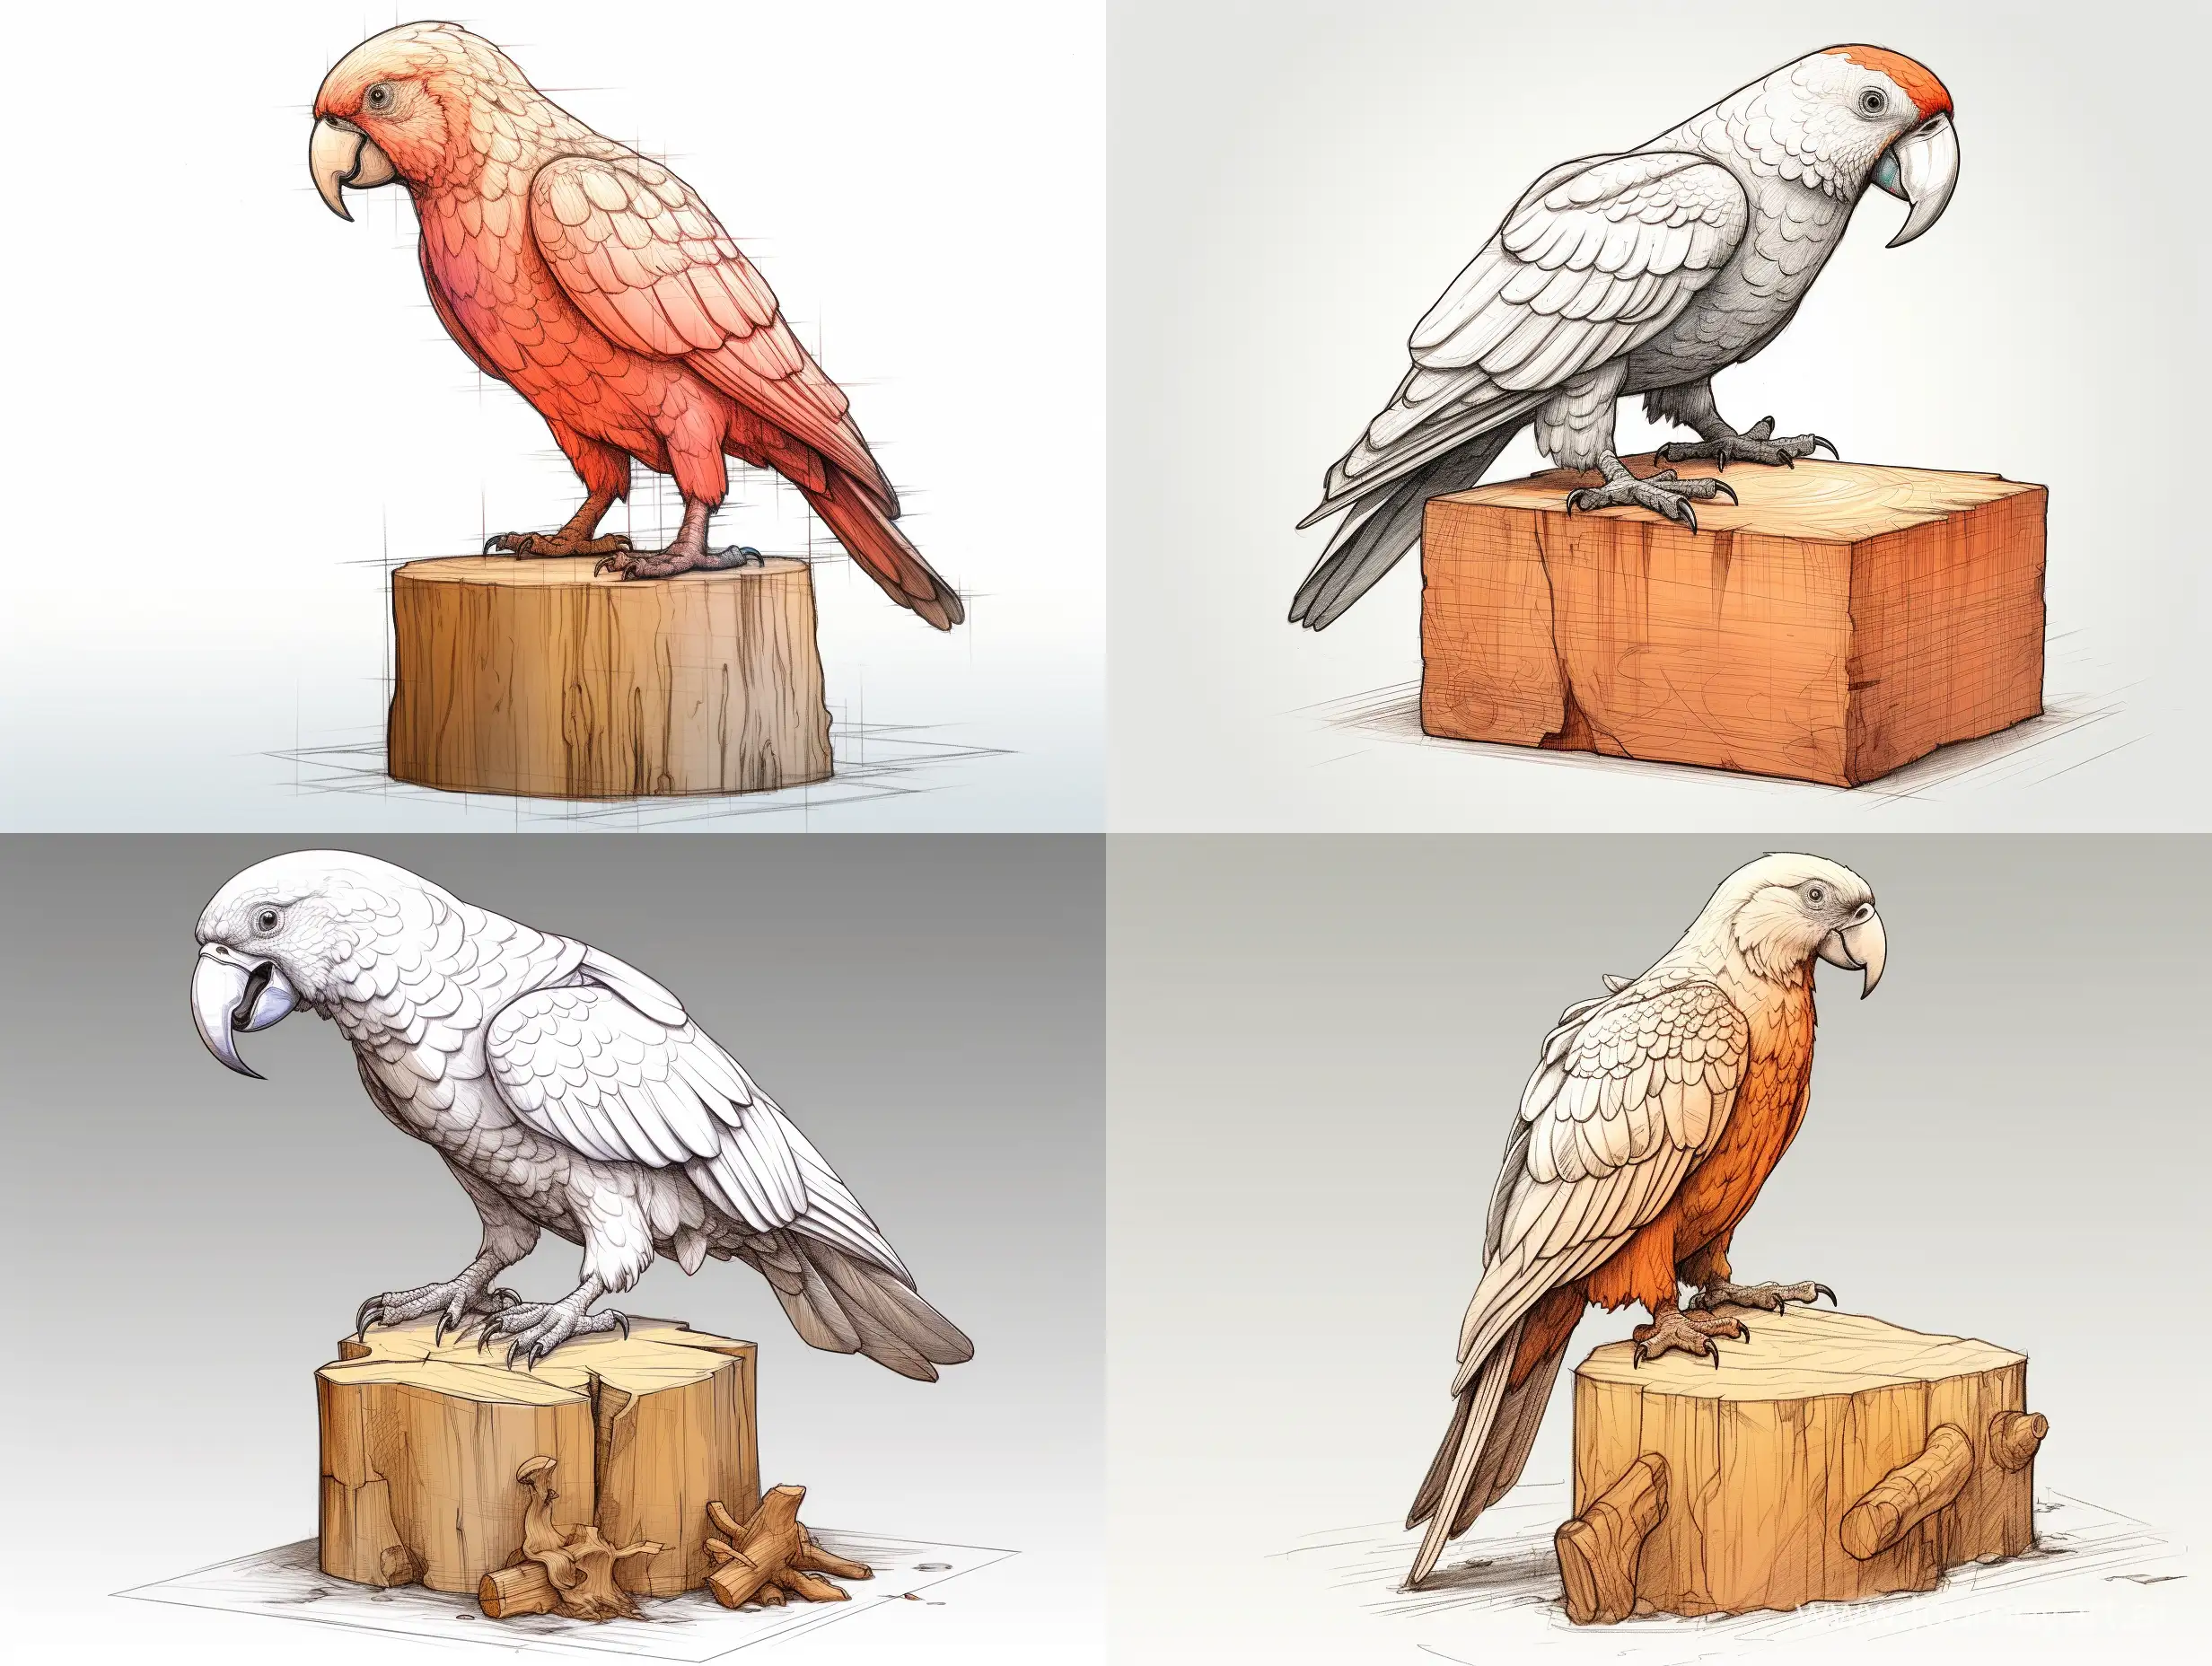 Dynamic-Wooden-Parrot-Sculpture-Ready-for-Battle-3D-Professional-Wood-Carving